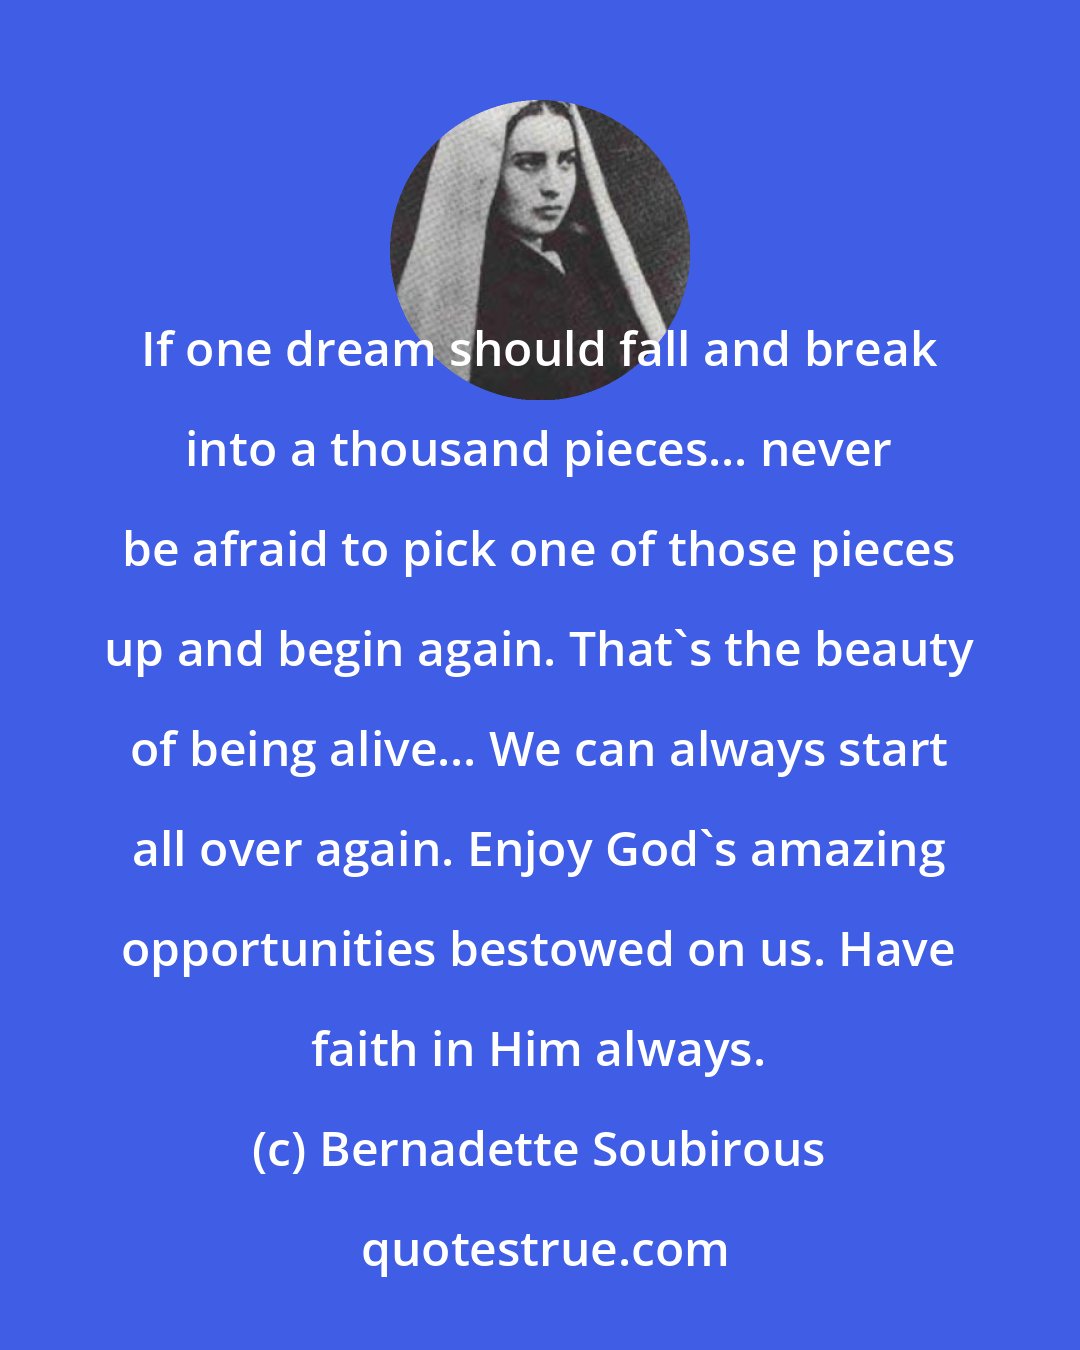 Bernadette Soubirous: If one dream should fall and break into a thousand pieces... never be afraid to pick one of those pieces up and begin again. That's the beauty of being alive... We can always start all over again. Enjoy God's amazing opportunities bestowed on us. Have faith in Him always.